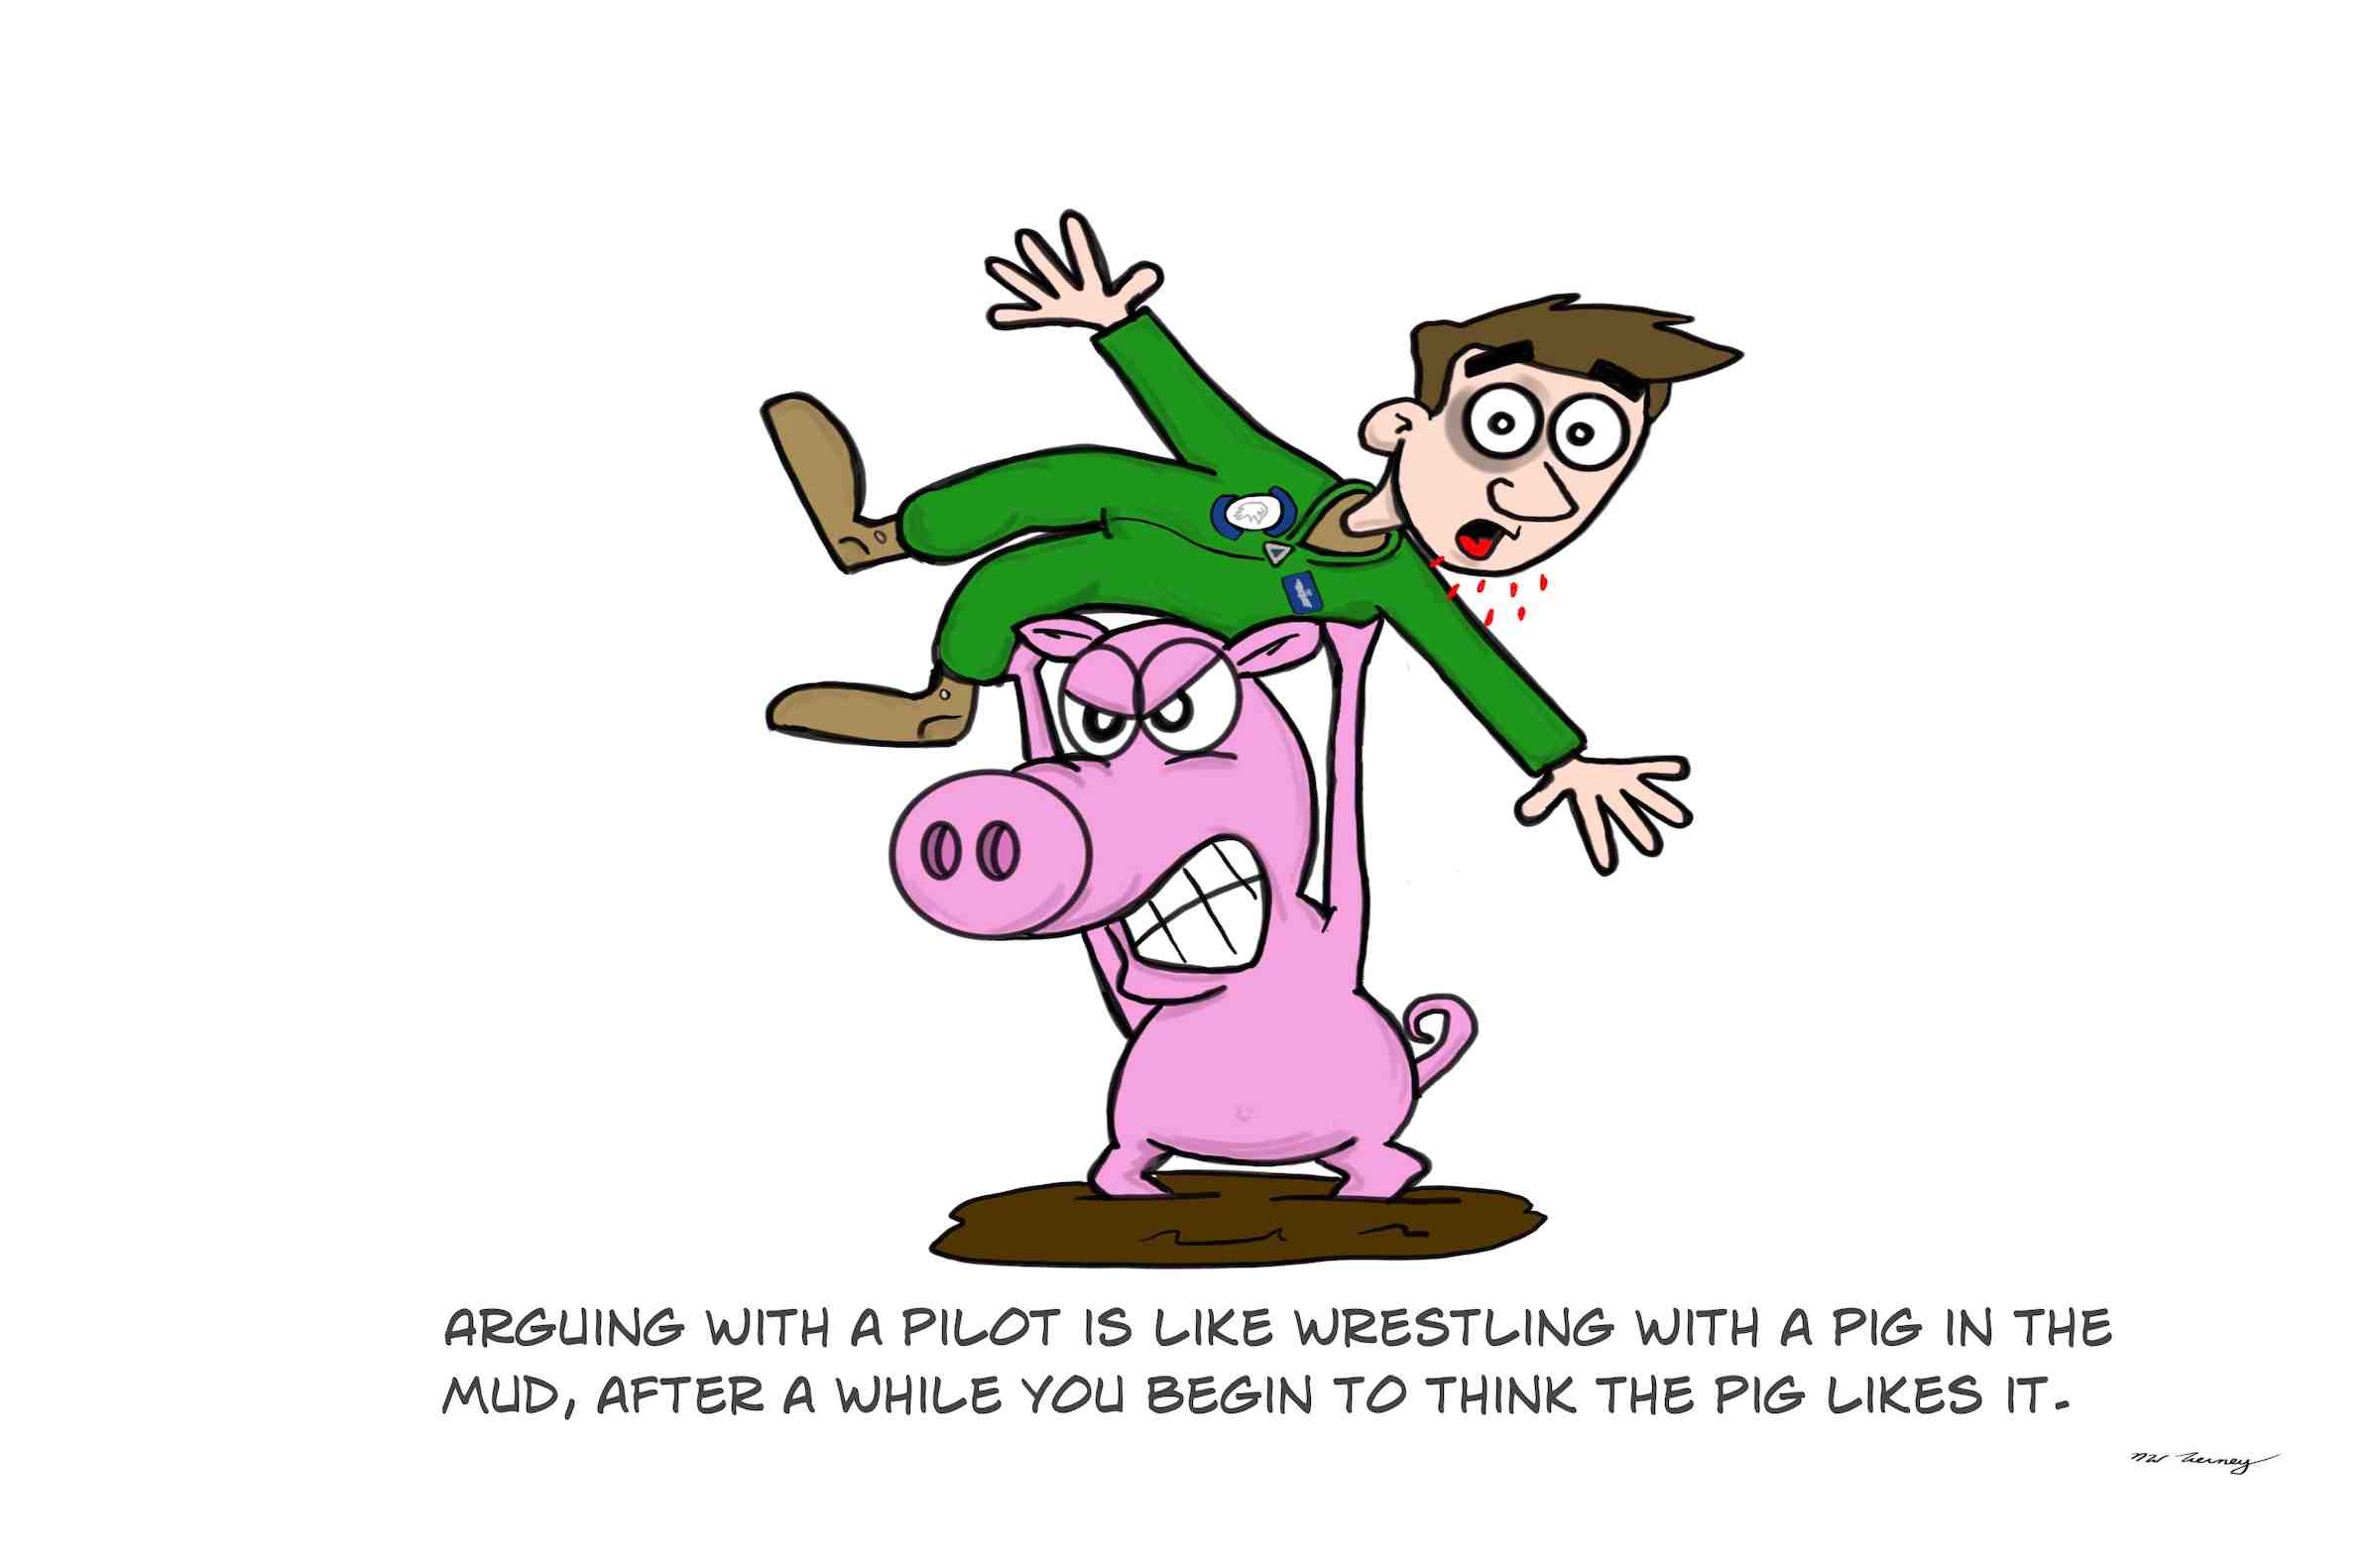 A pig likes wrestling an Army pilot.